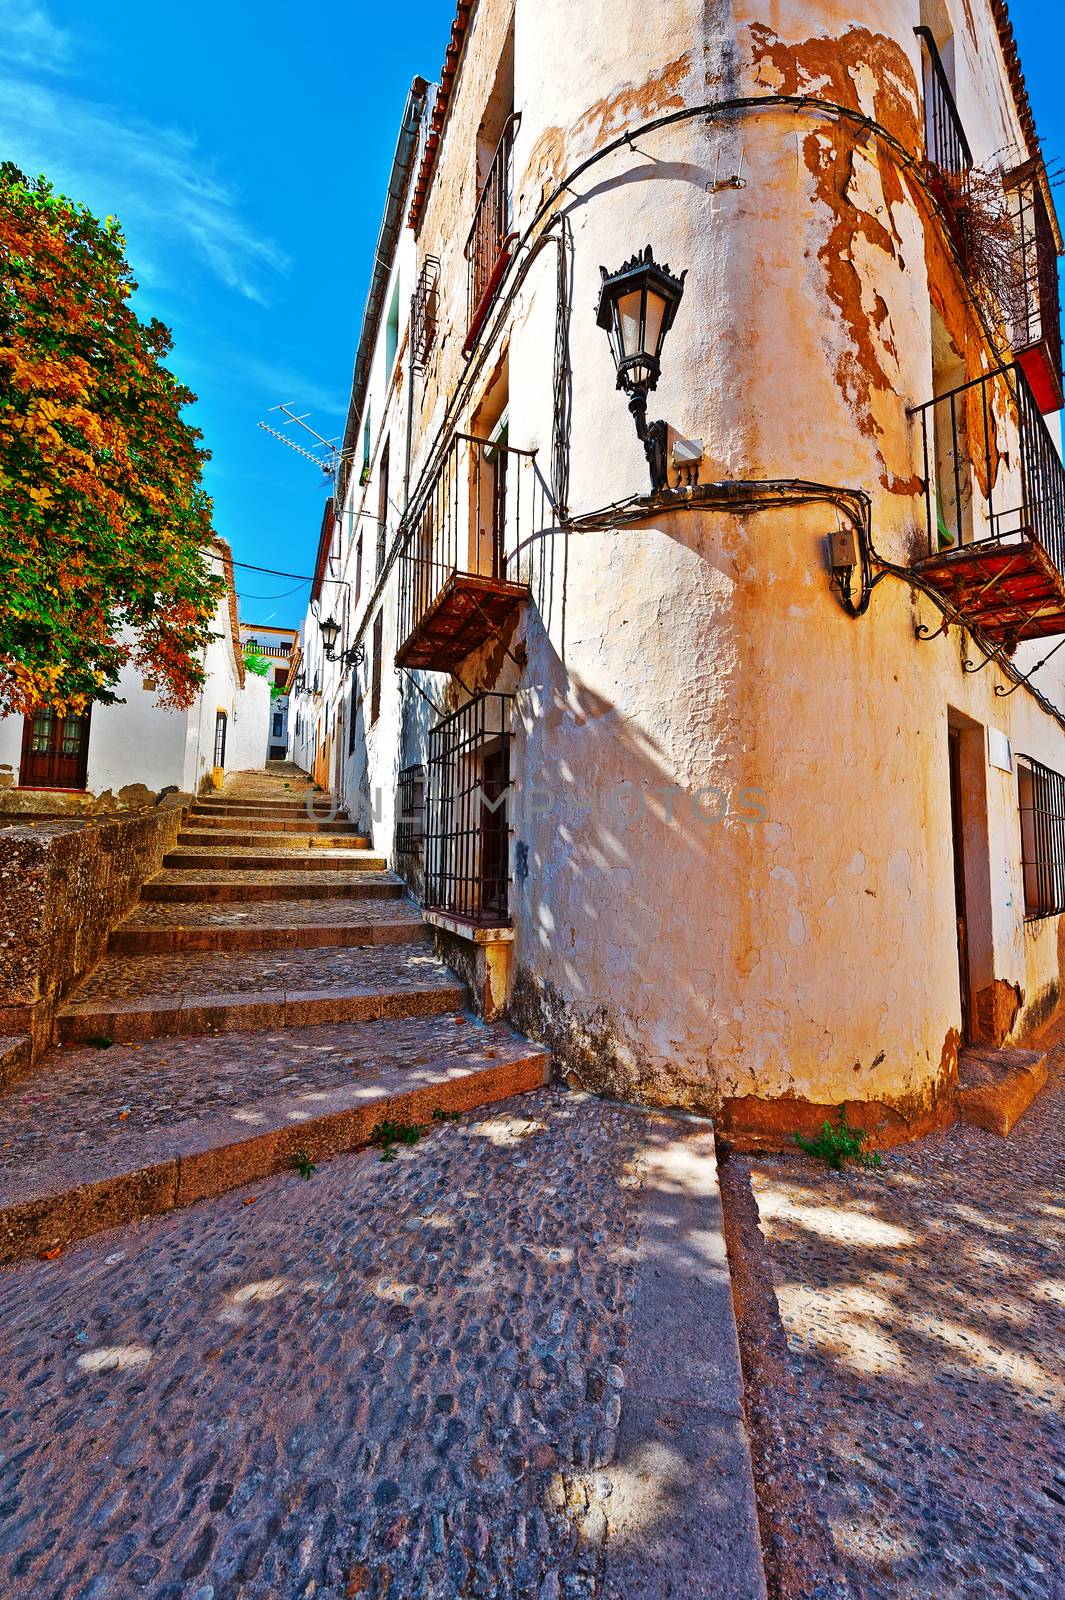 Siesta in the Typical Medieval Spanish City